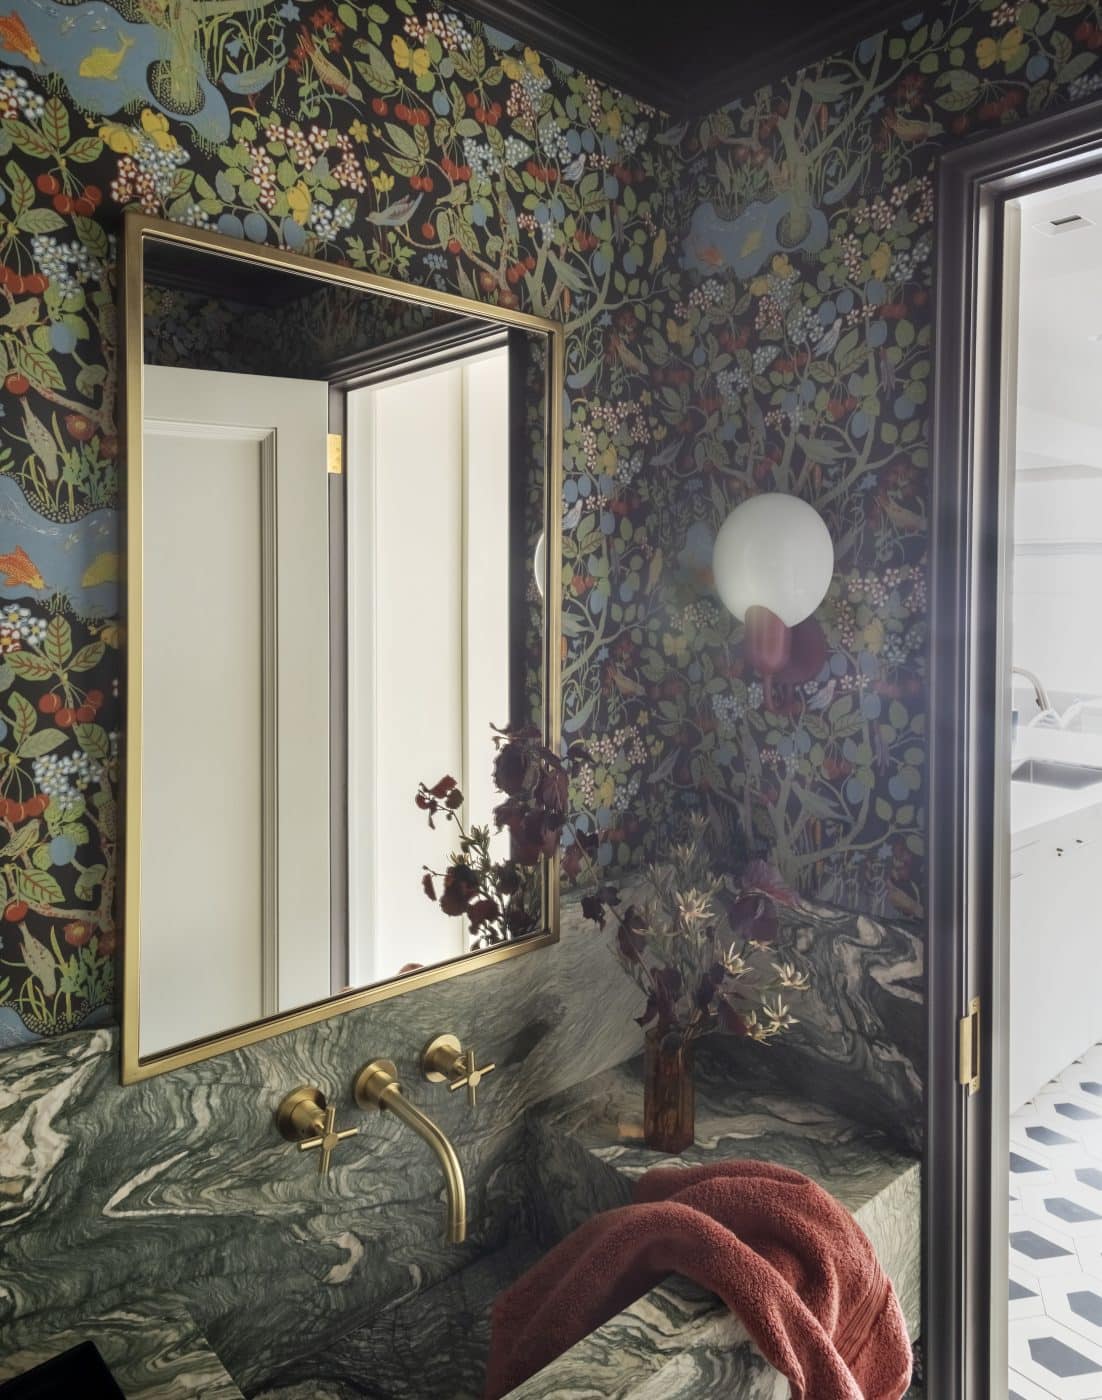 Bathrooms of a Studio DB-designed 19th-century Brooklyn townhouse and Upper West Side prewar apartment in New York City